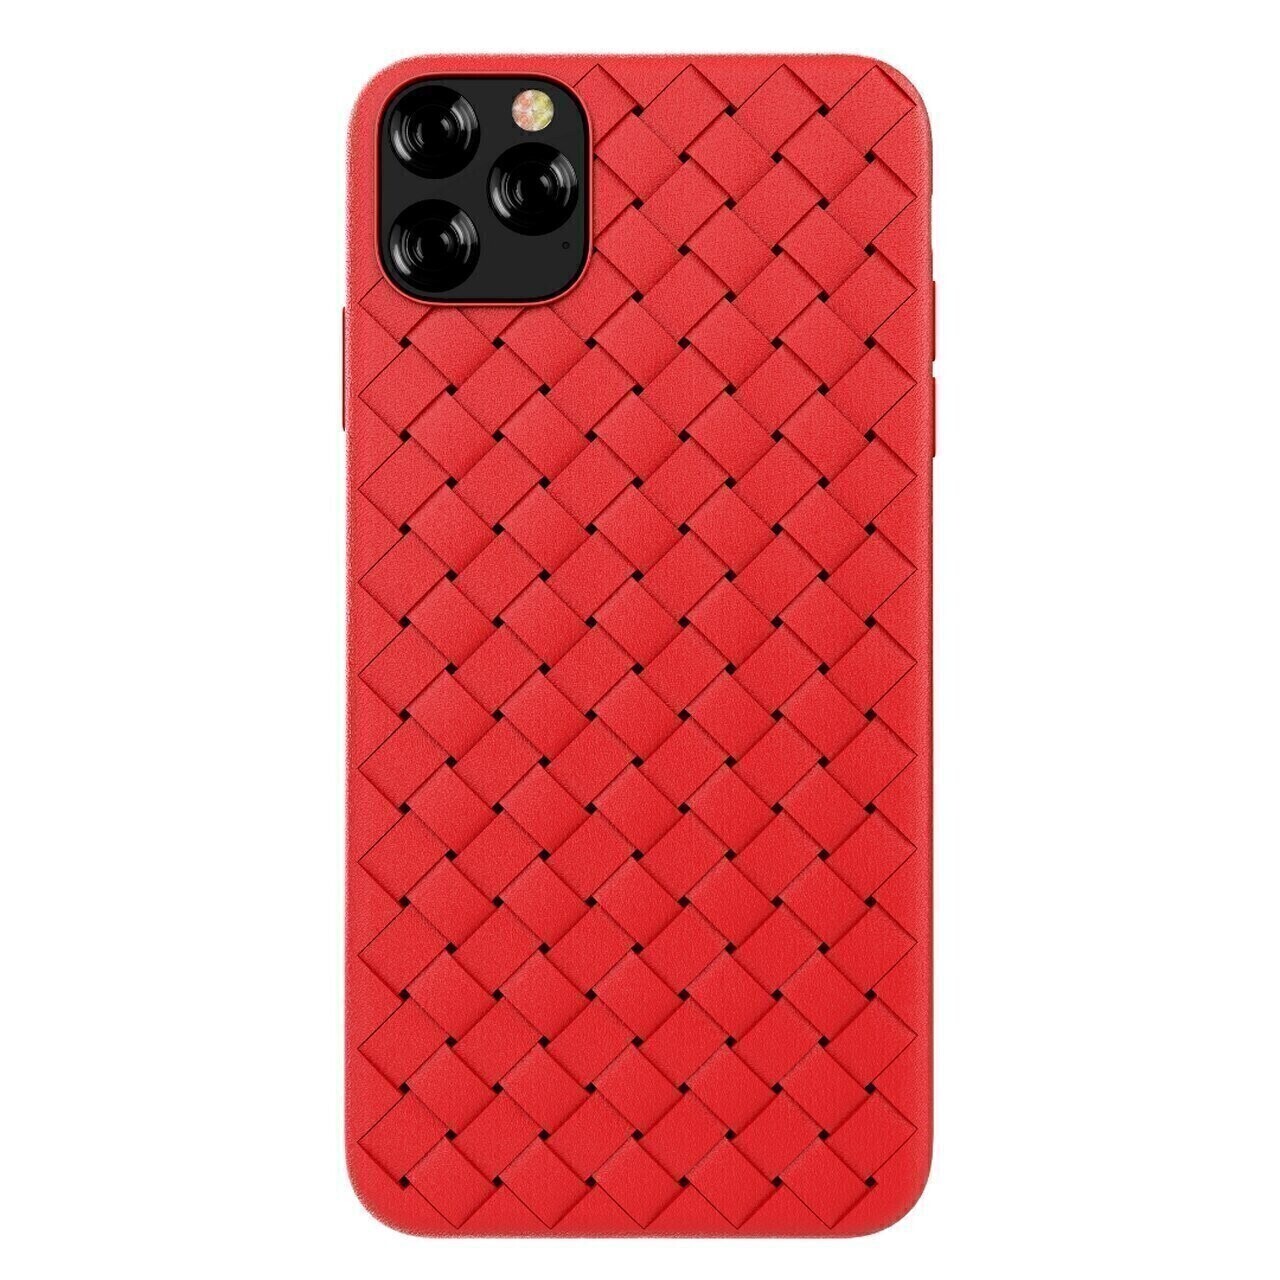 Devia iPhone 11 6.1" Woven 2 Pattern Design Soft Case, Red